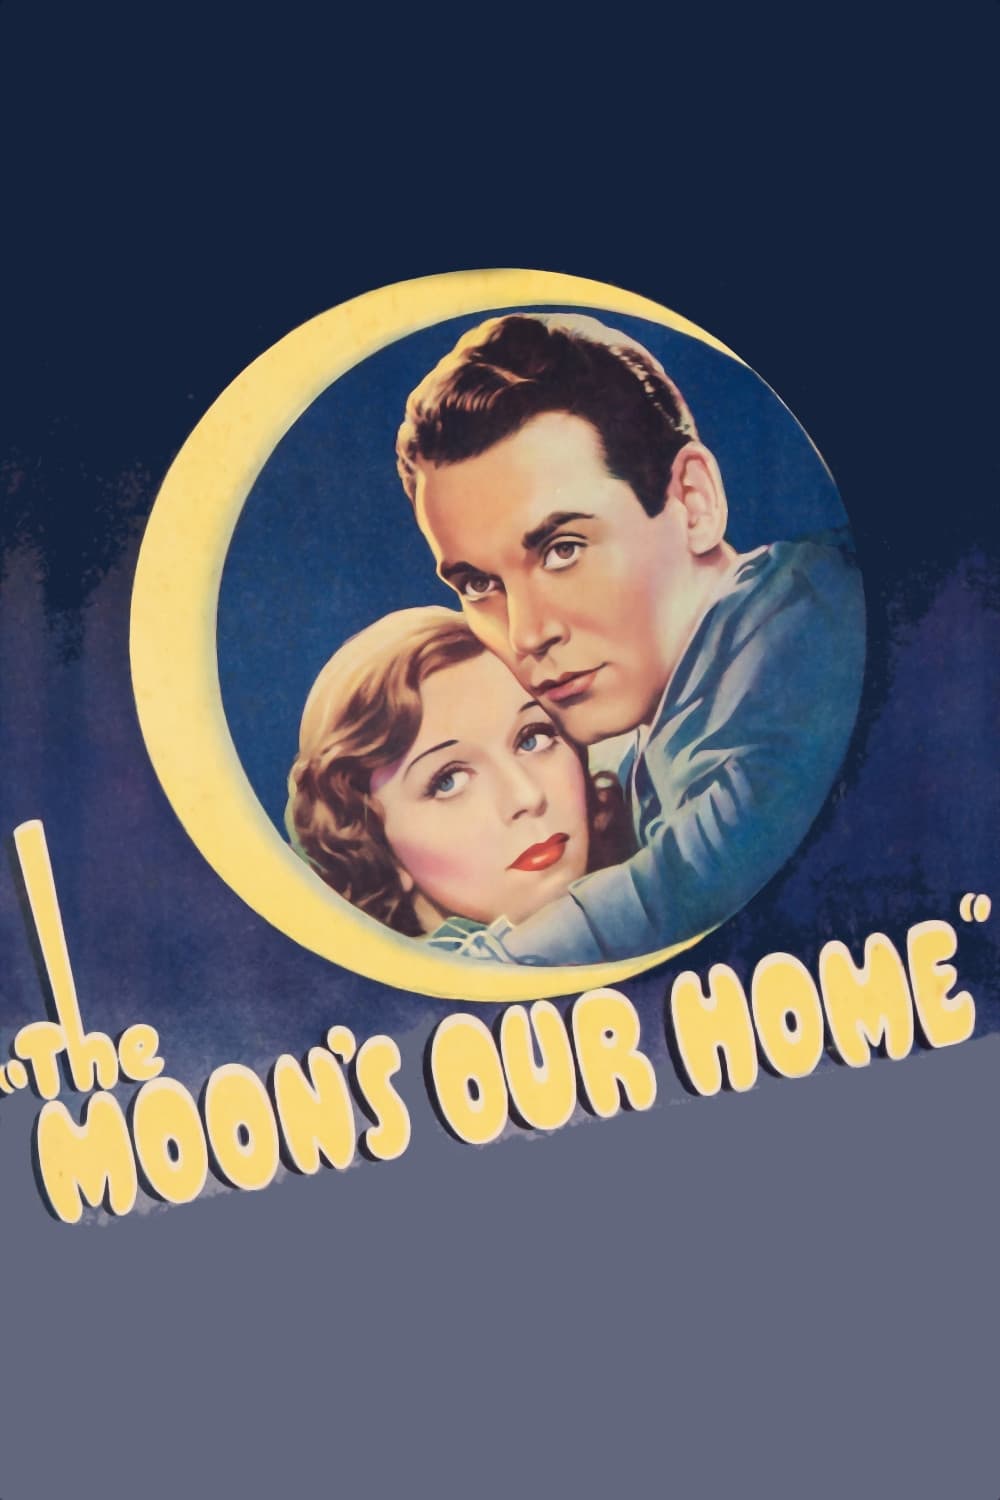 The Moon's Our Home (1936)